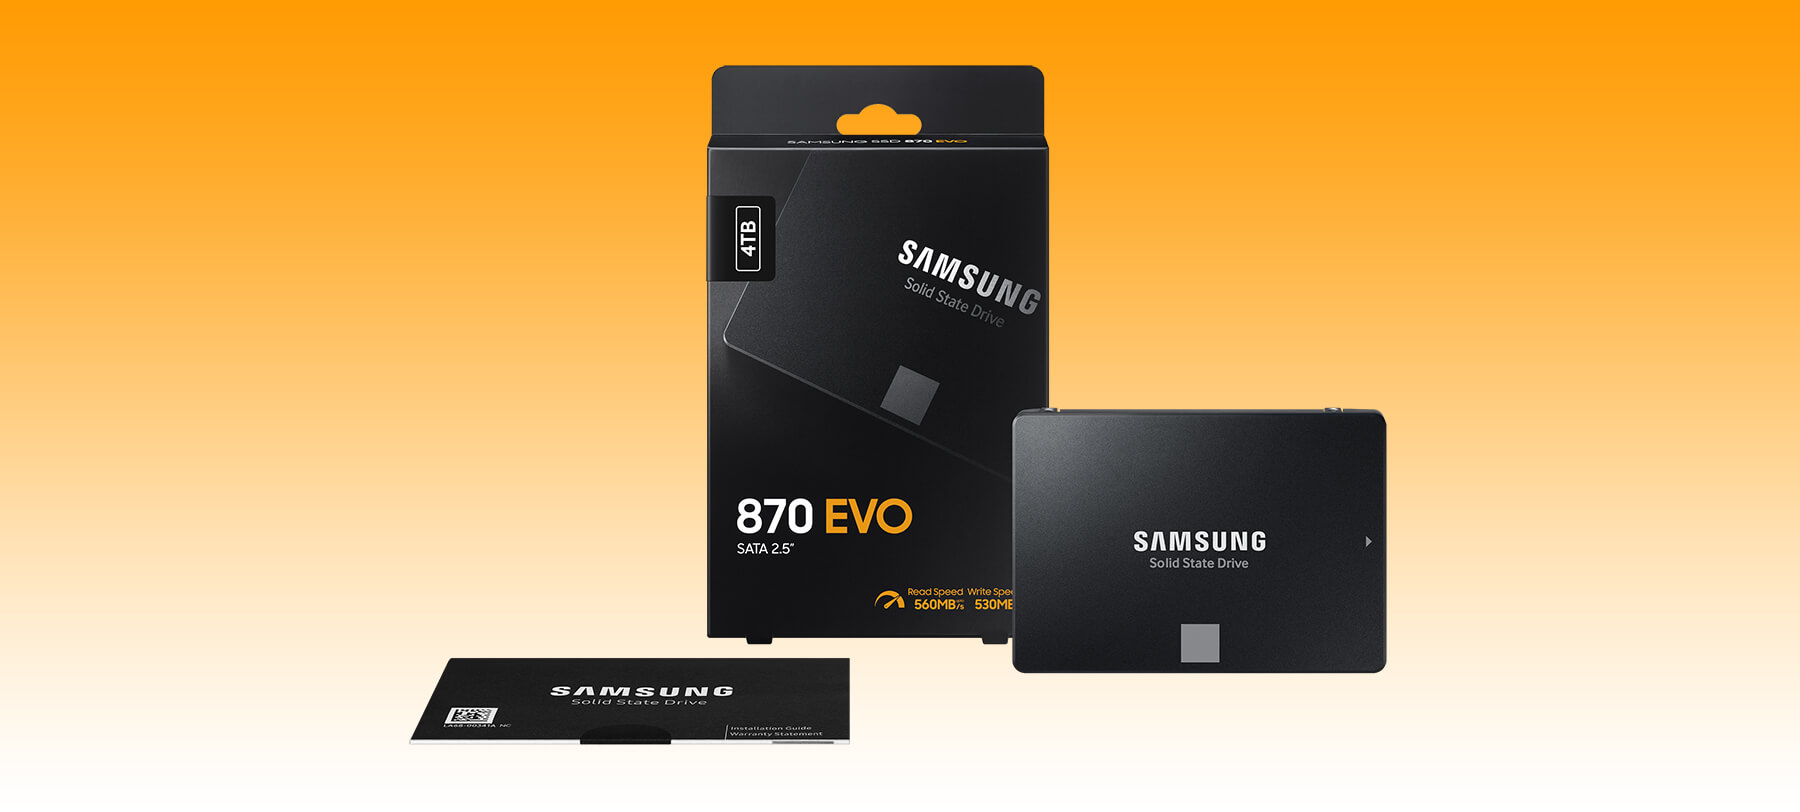 Hands-on with the Samsung 870 EVO SSD - Pro Moviemaker